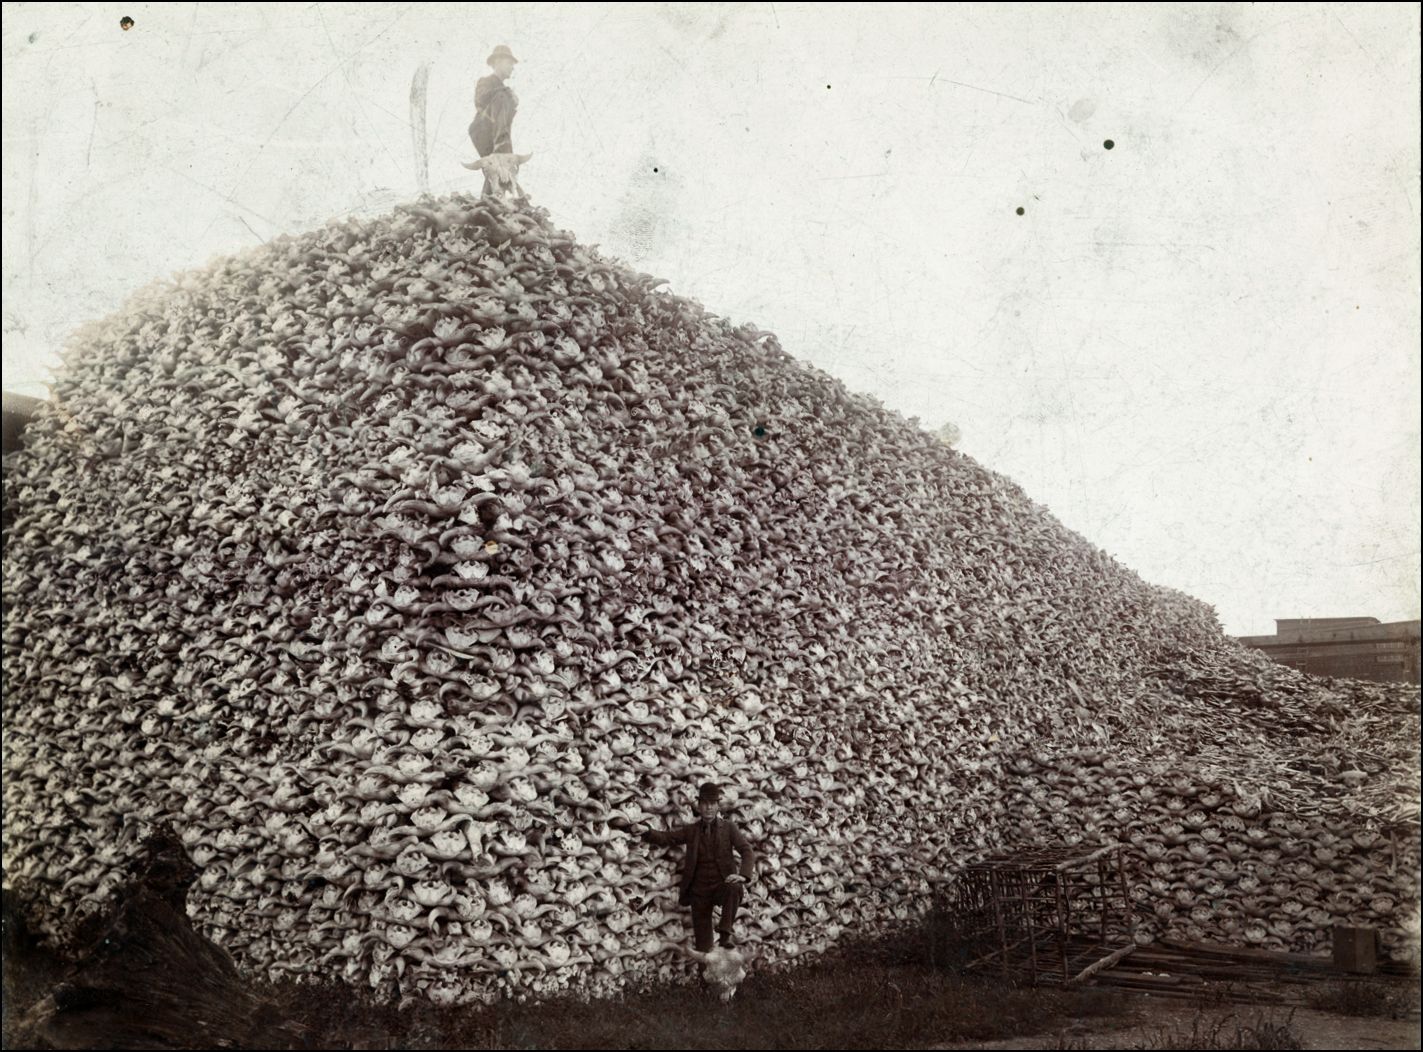 Once estimated to number 50 million, buffalo were nearly extinct by the end of the 19th Century.